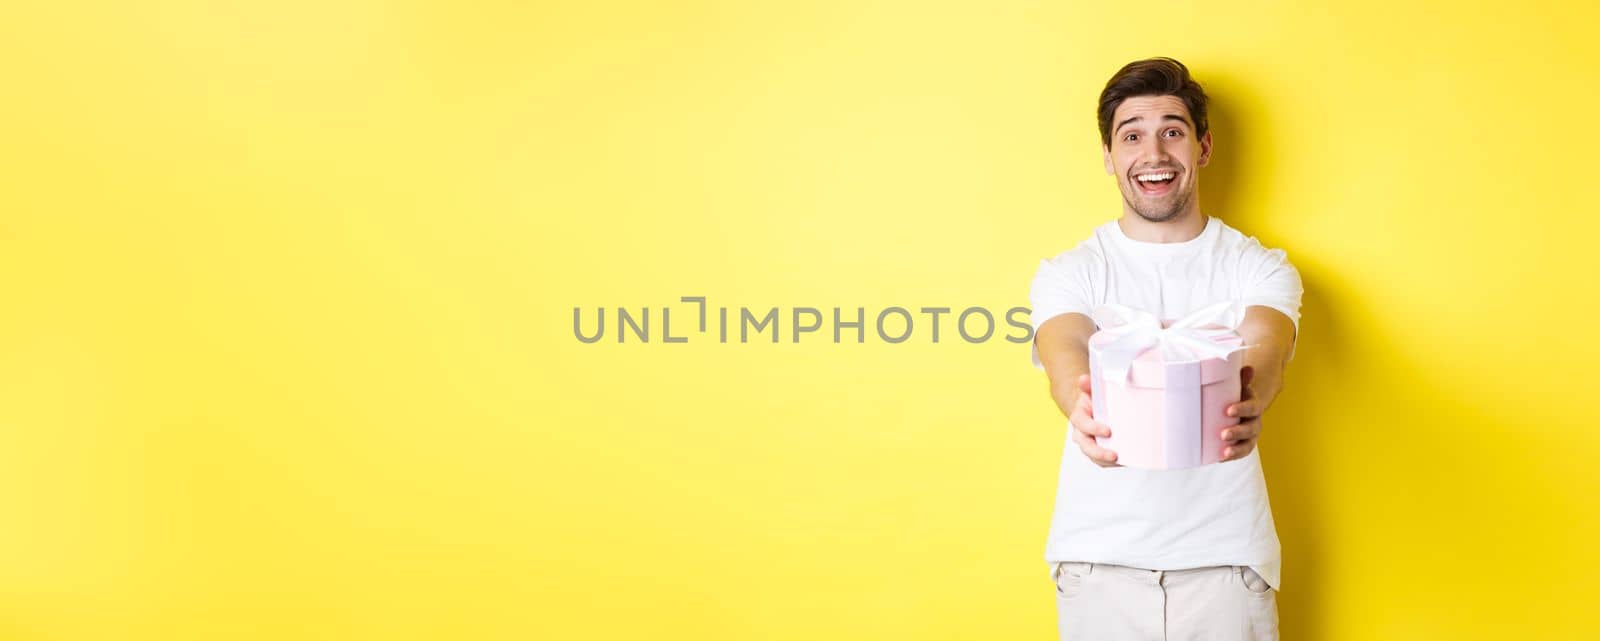 Concept of holidays and celebration. Smiling man giving you gift, congratulating, standing over yellow background with present.